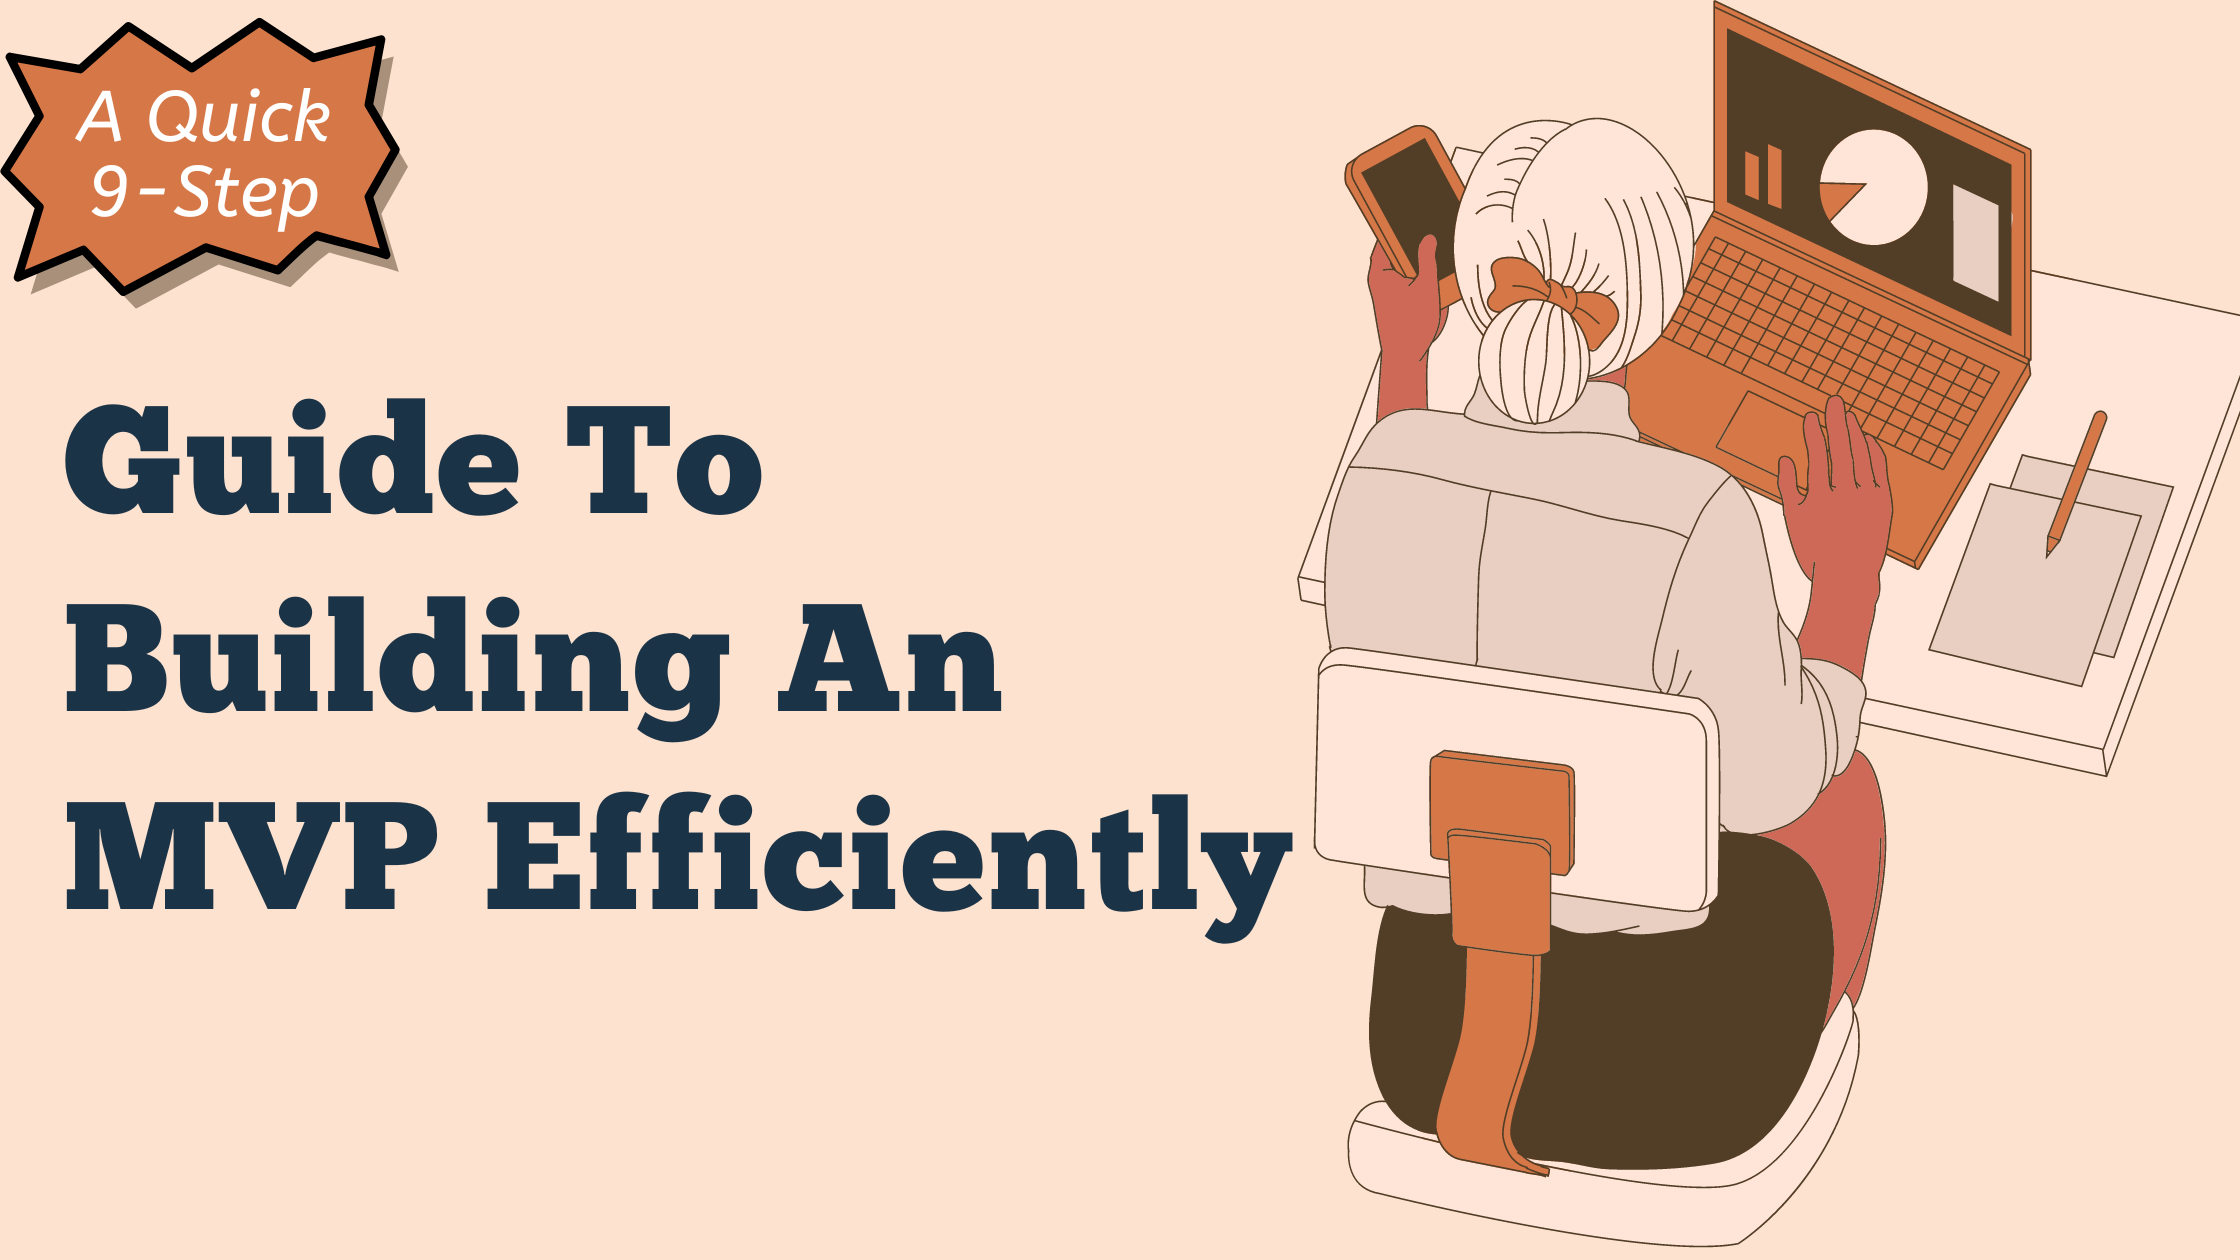 A Quick 9-Step Guide To Building An MVP Efficiently